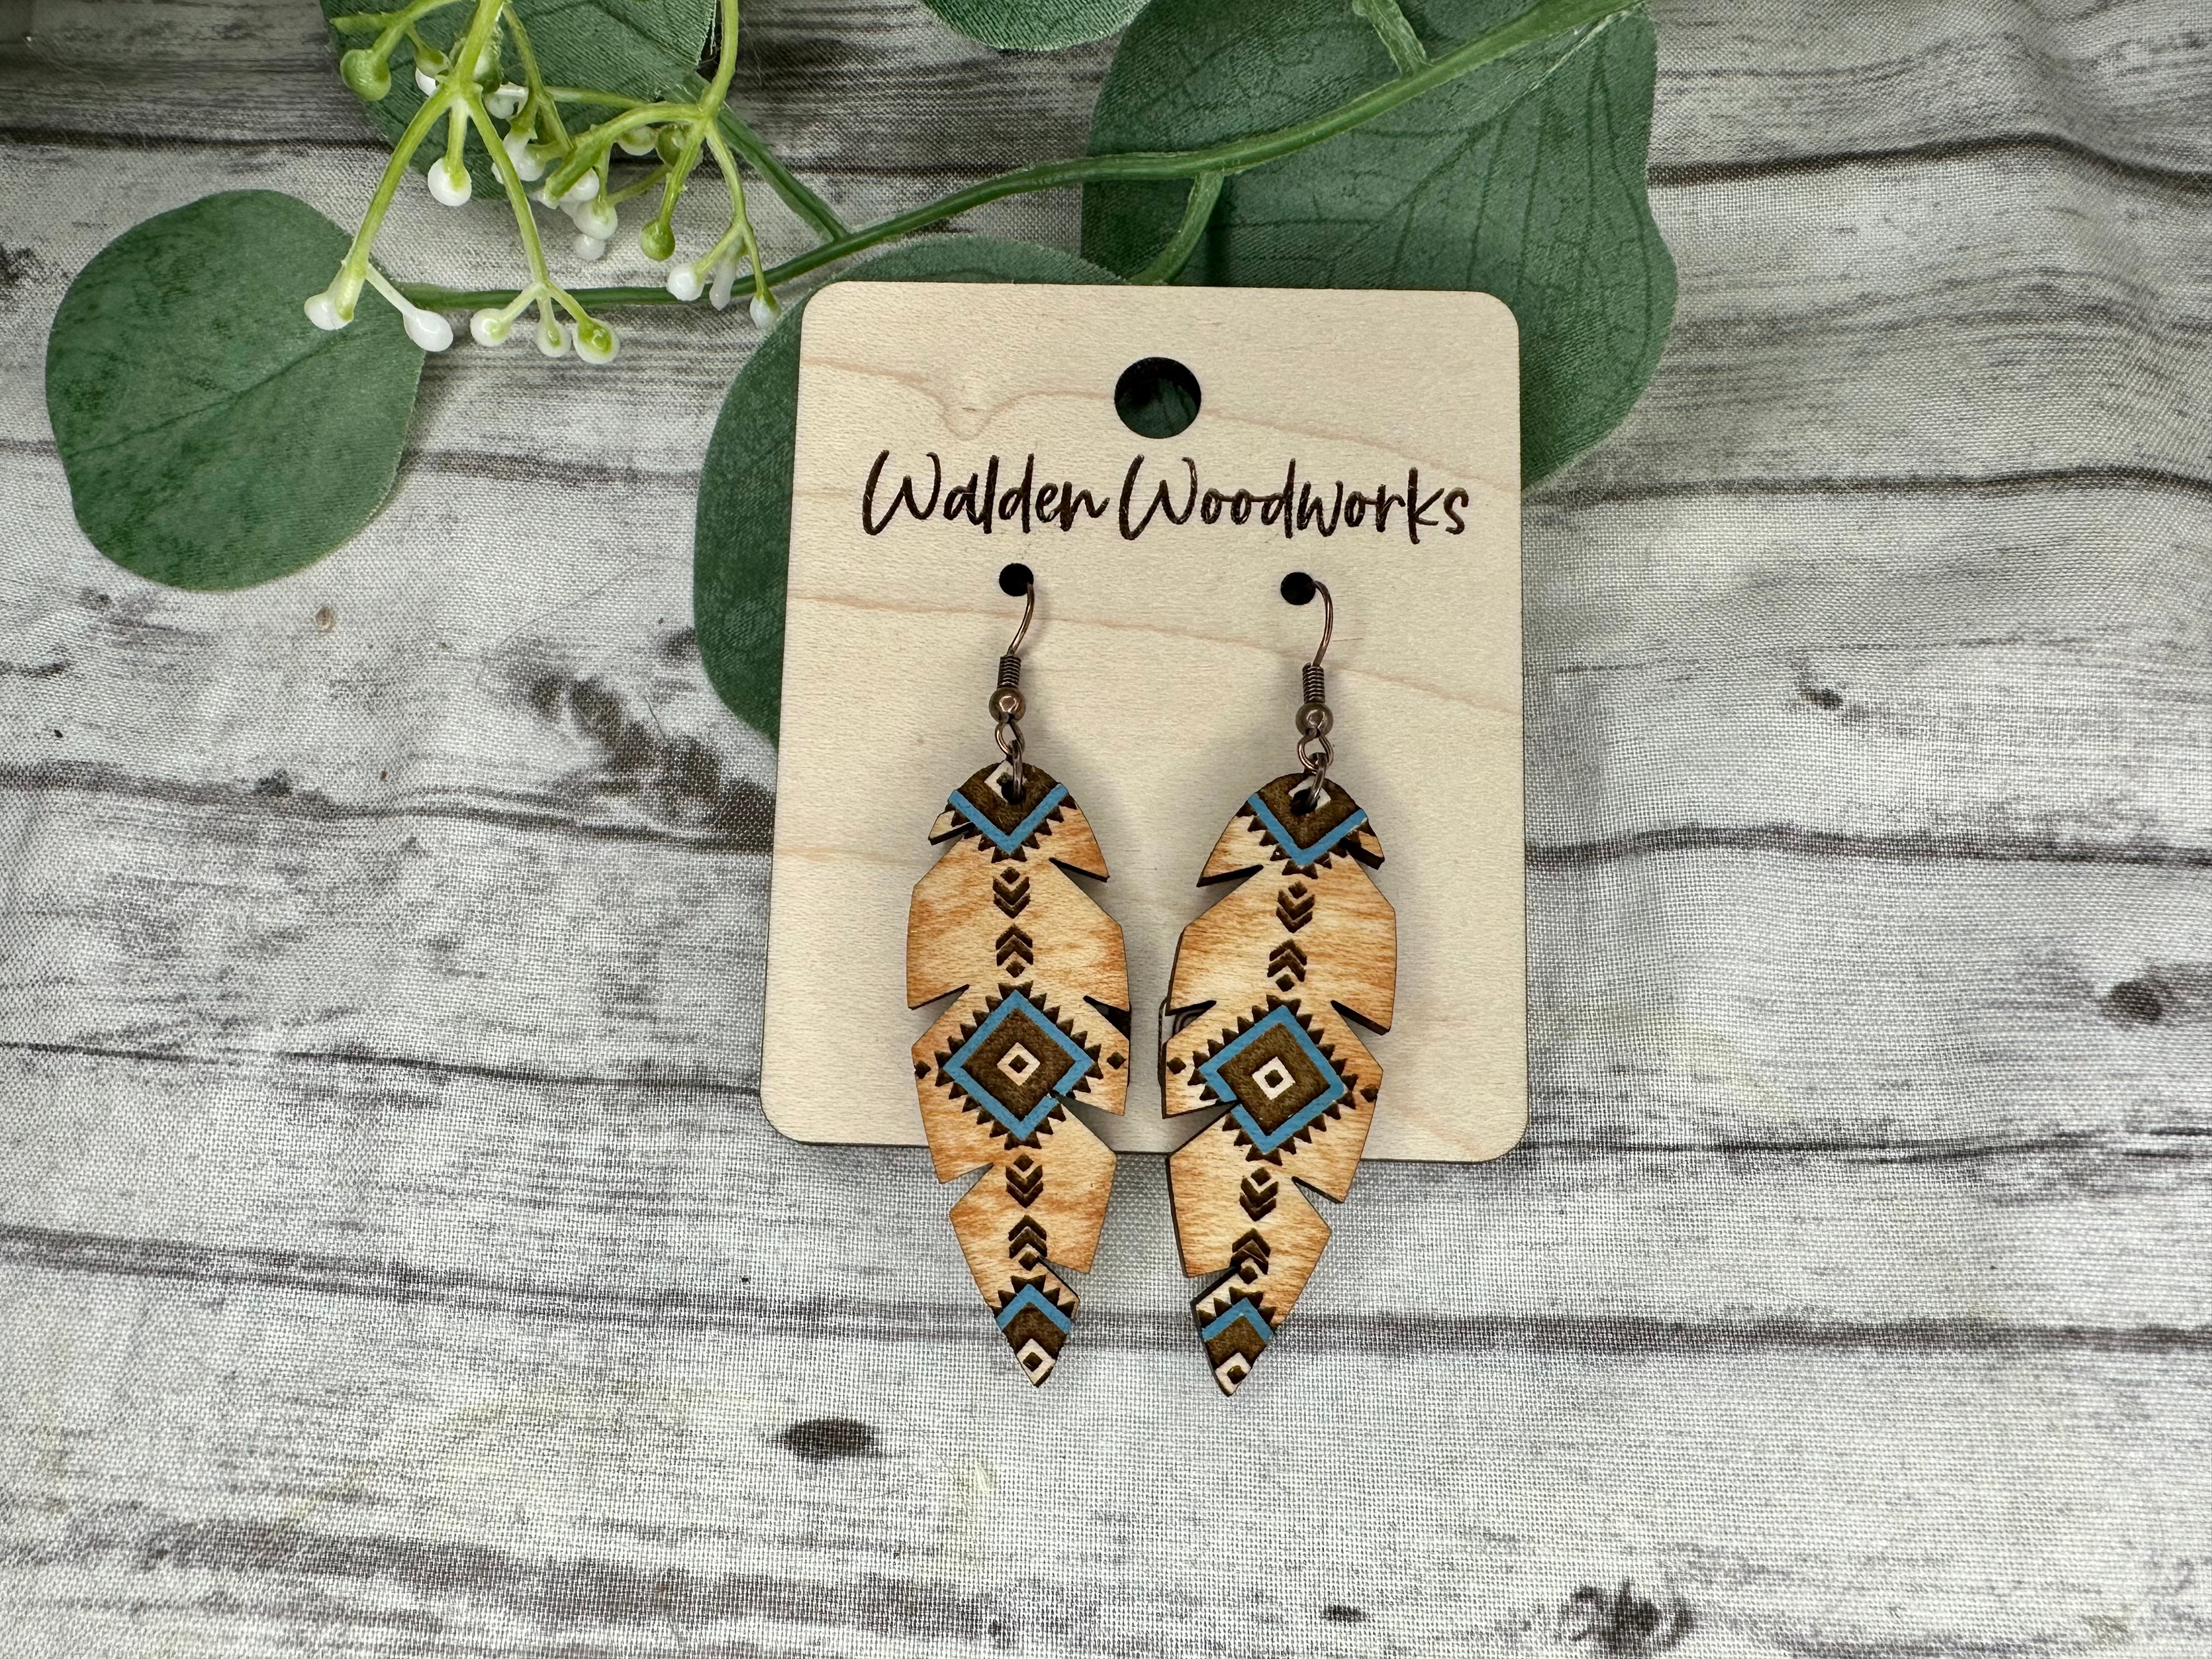 Native Feather earrings